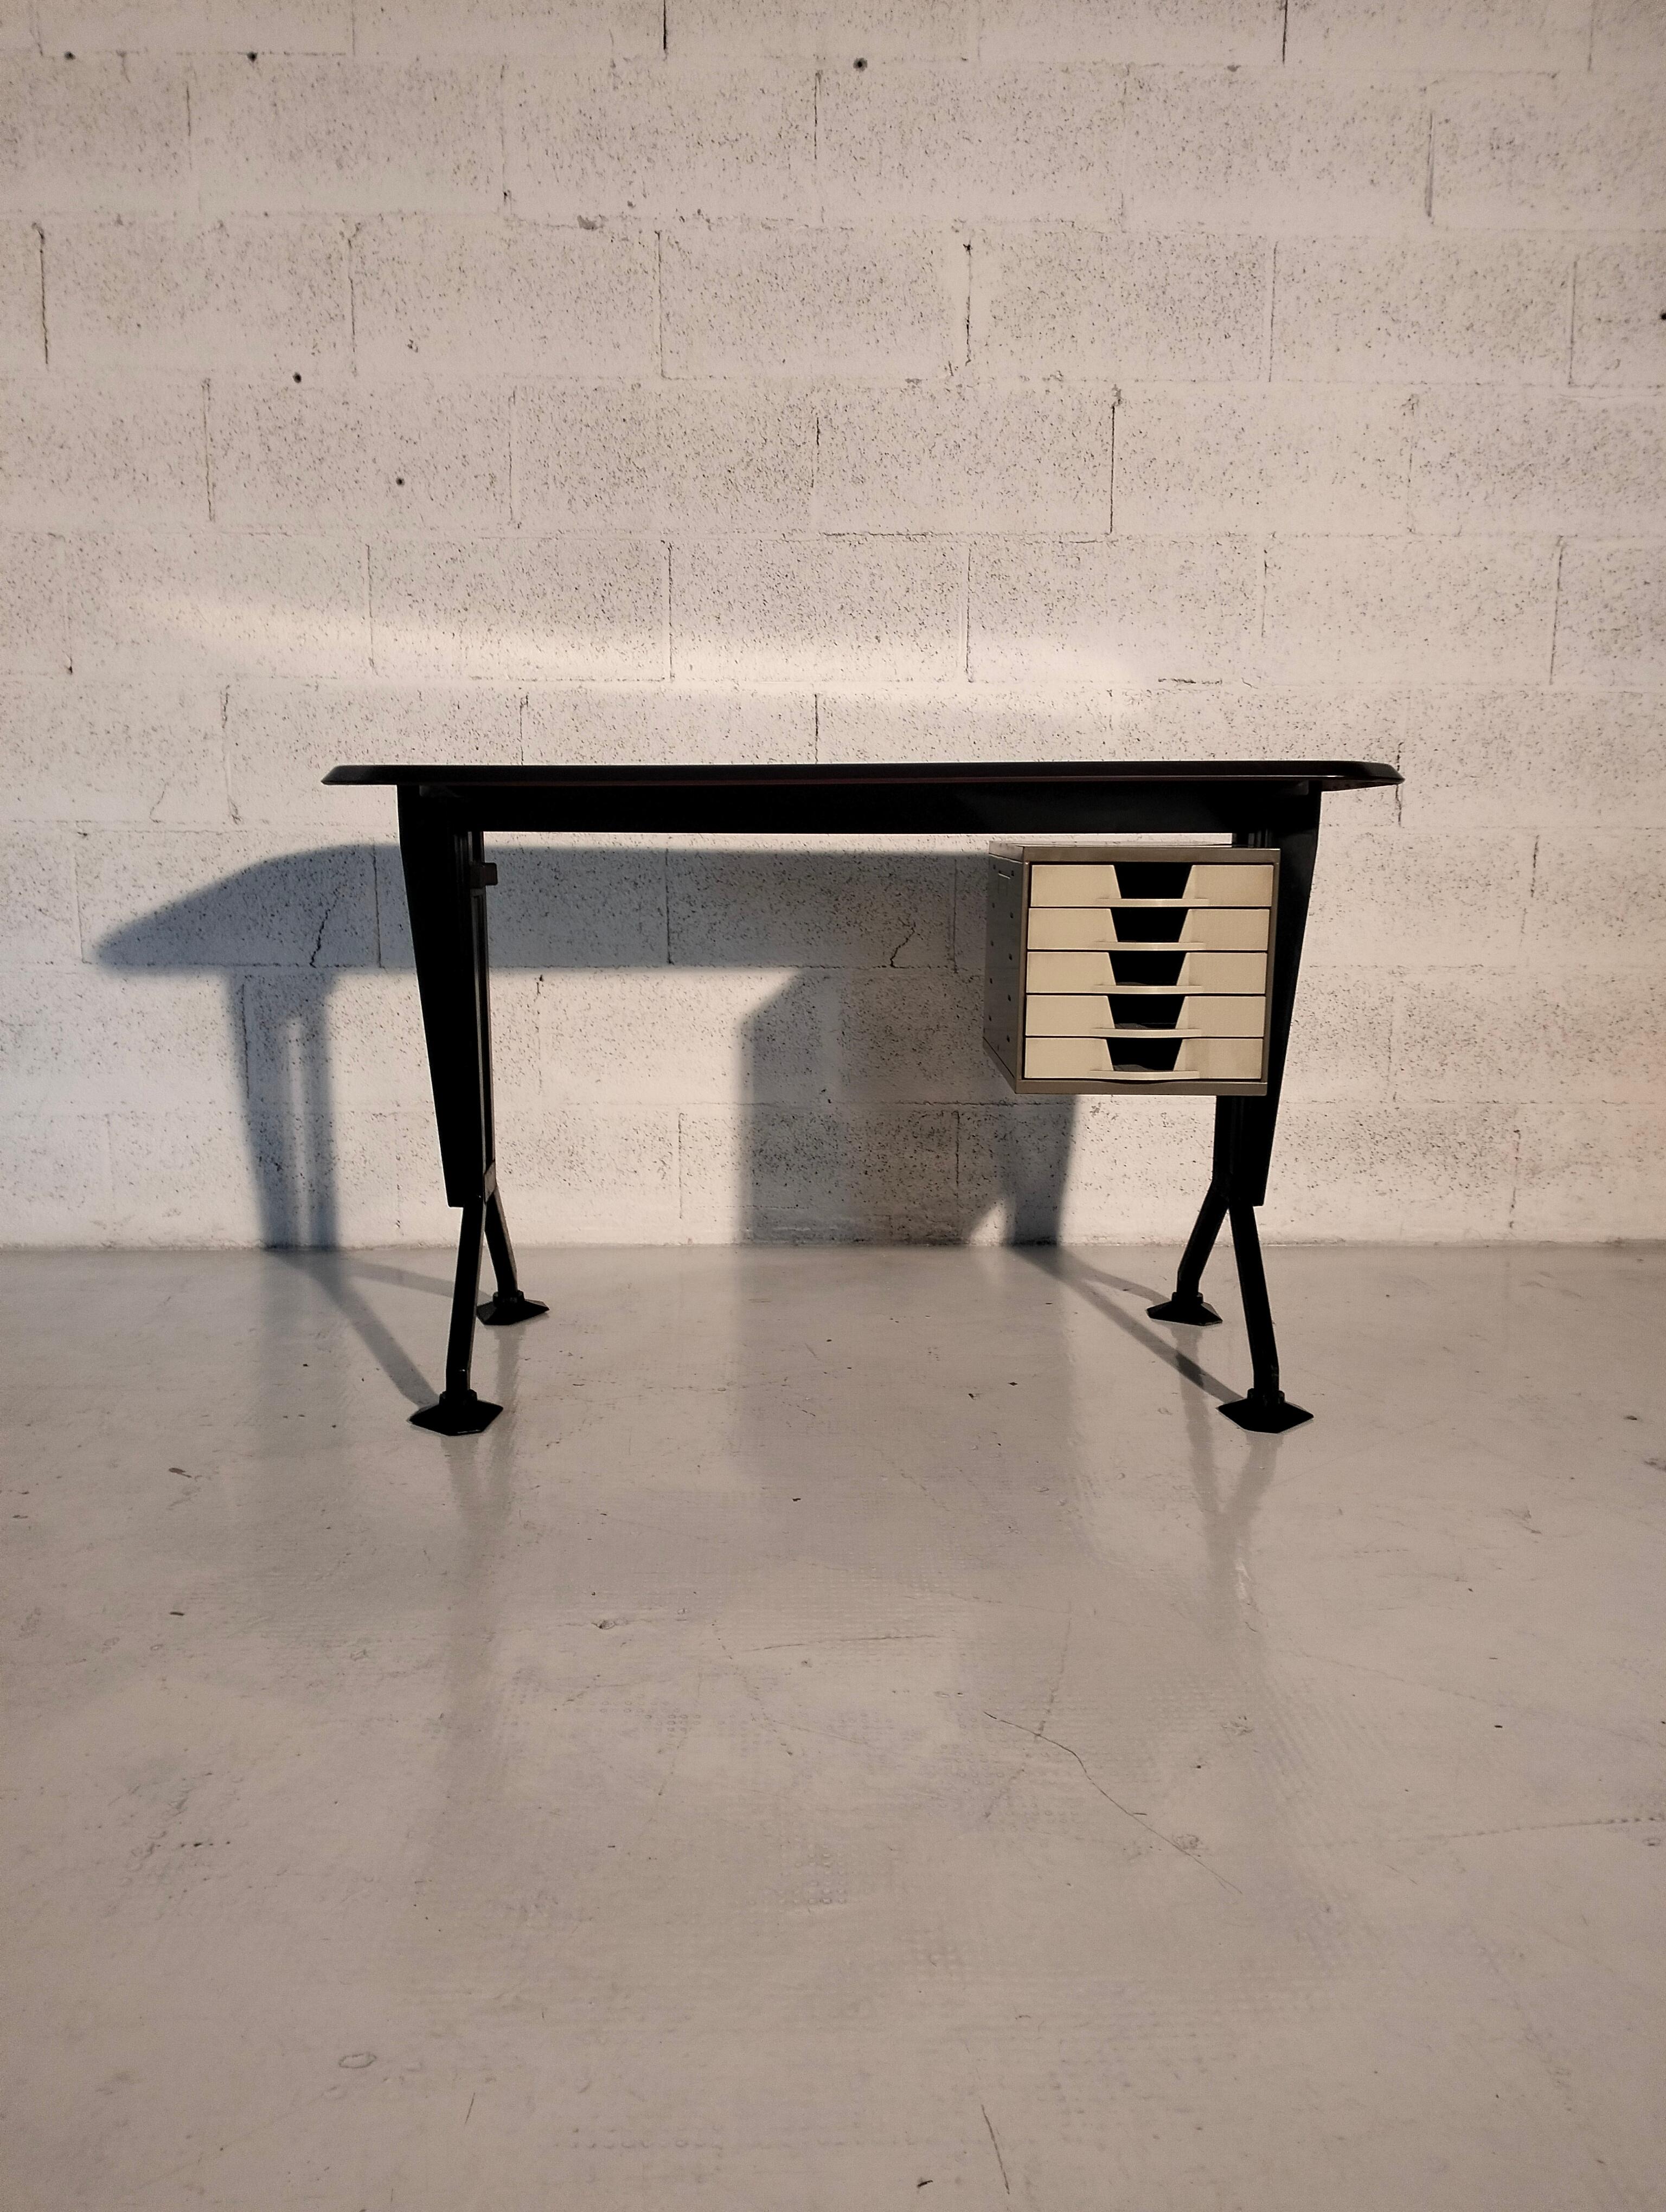 Desk designed in the 1960s by Studio BBPR for Olivetti Synthesis.
The desk is complete with a five-drawer chest of drawers. Iconic office furniture that holds a prominent place in the history of design.
BBPR was the acronym that indicated the group